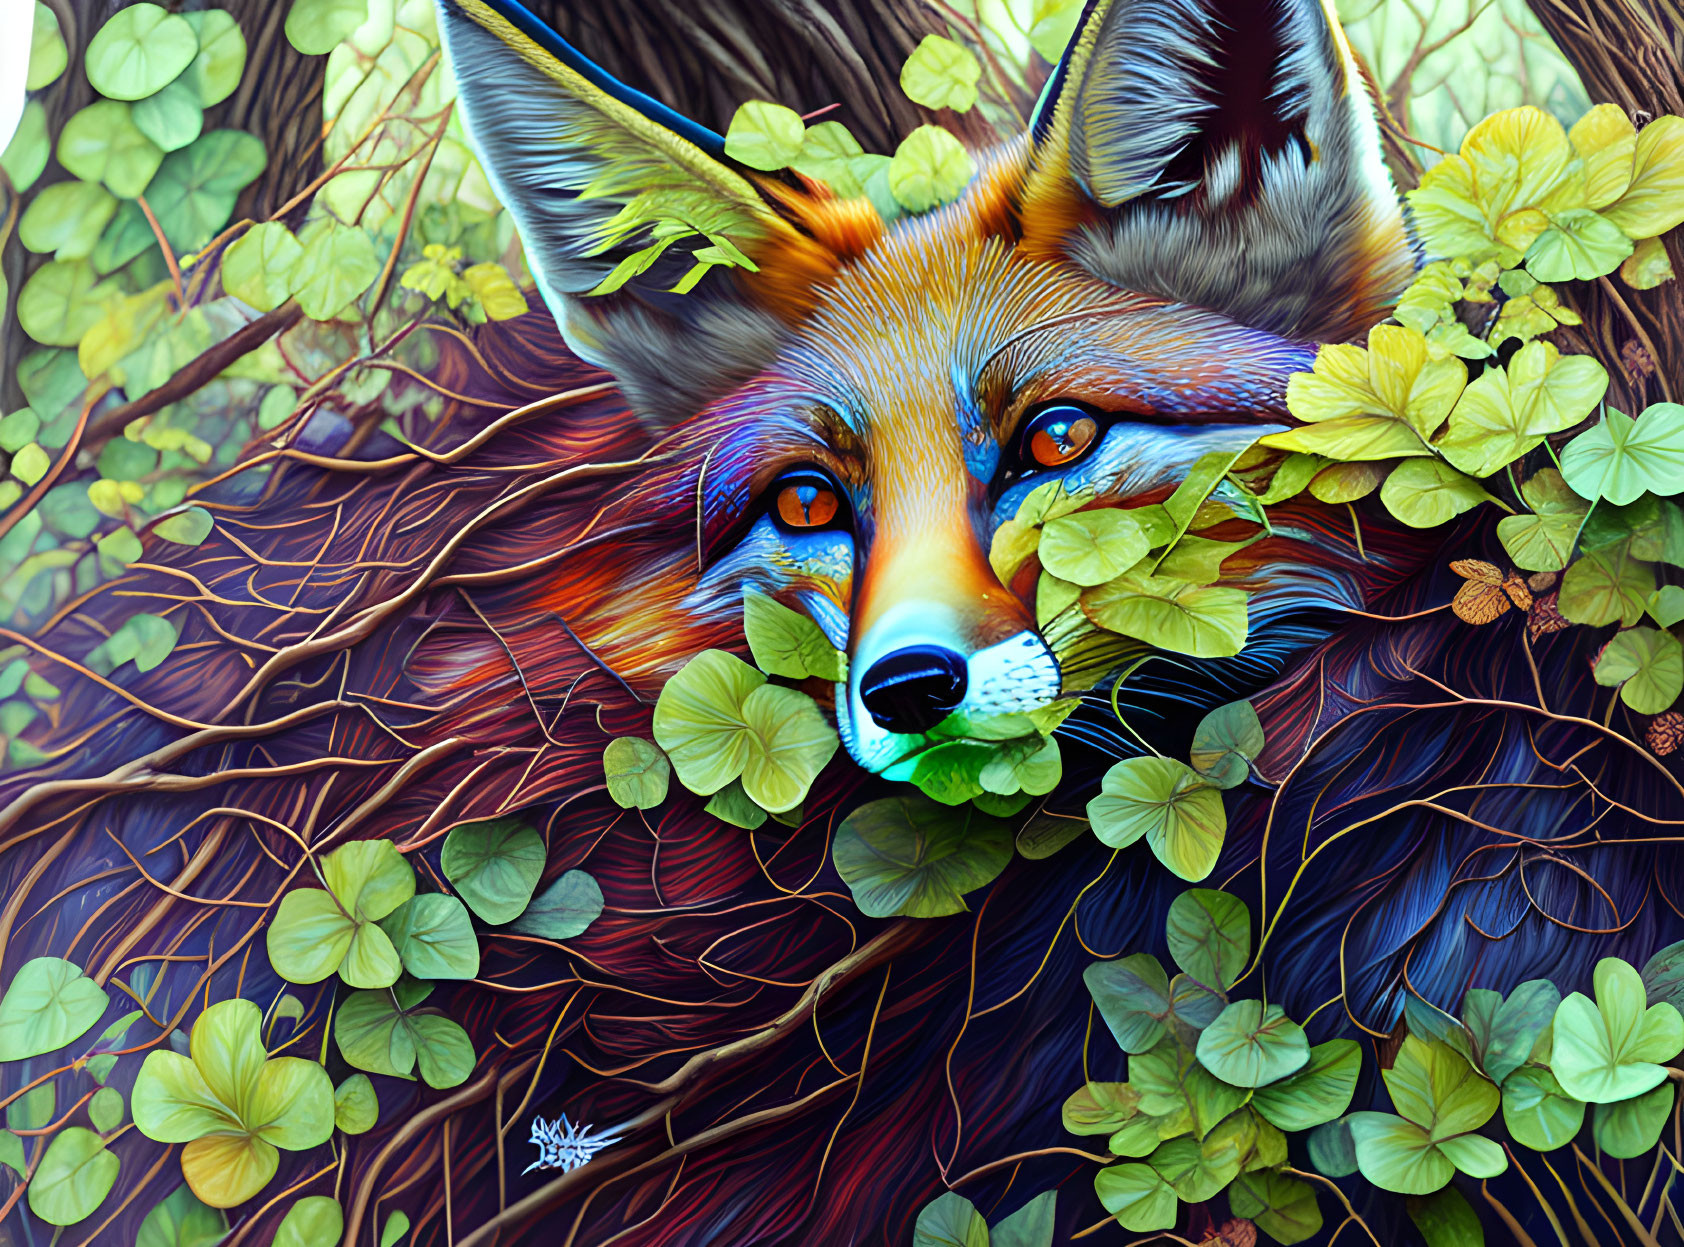 Colorful Fox Illustration with Blue Eyes in Green Foliage